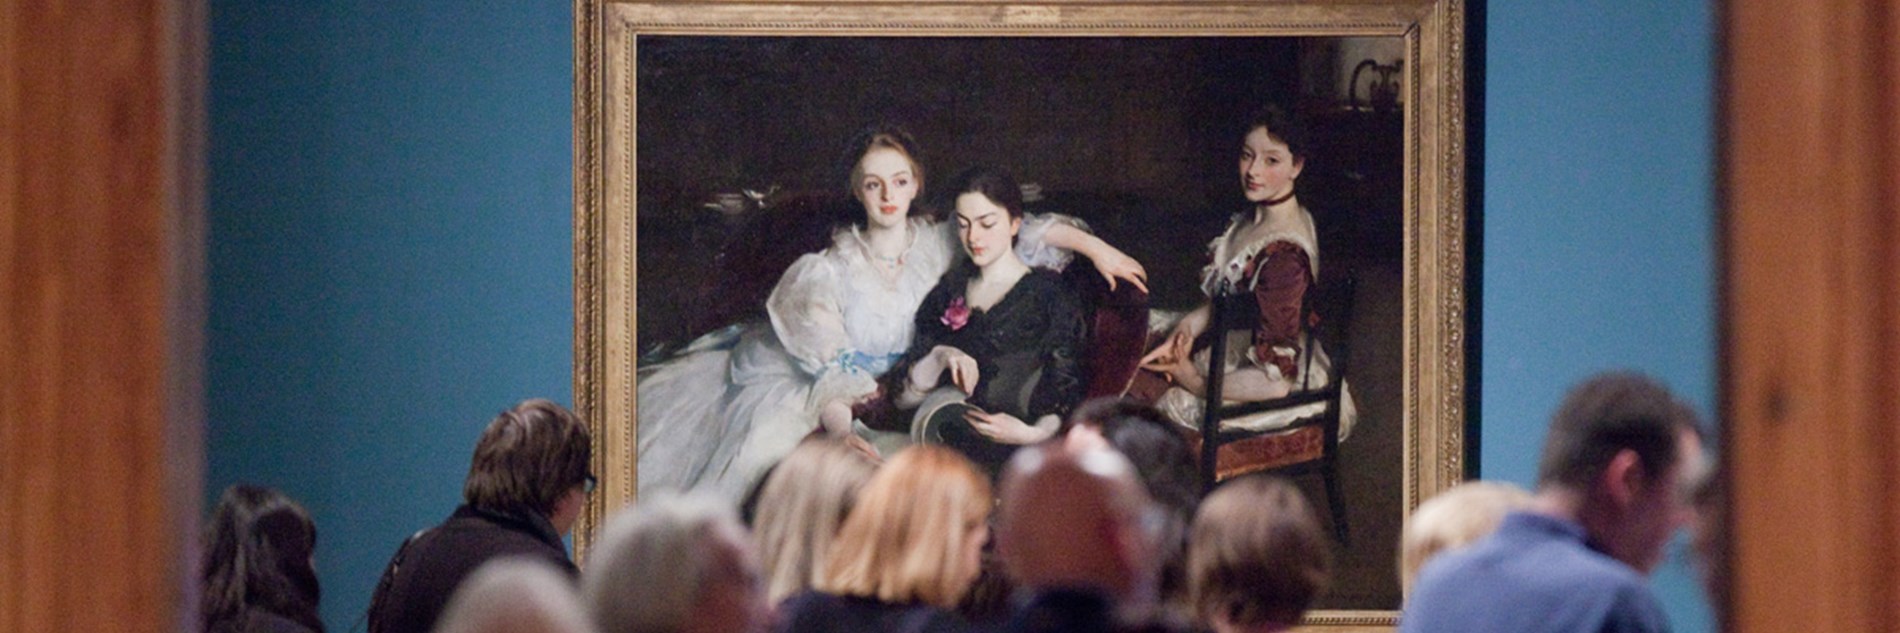 Adults in front of an oil painting, The Missus Vickers by John Singer Sargeant. The painting is of three women in formal Victorian dress. They are sitting informally next to each other - two women are sharing a chair and looking at a book, and the third woman is sitting on a chair behind them. The painting has a dark background, with the outline of a dresser on which sits a silver jug and a porcelain bowl. 